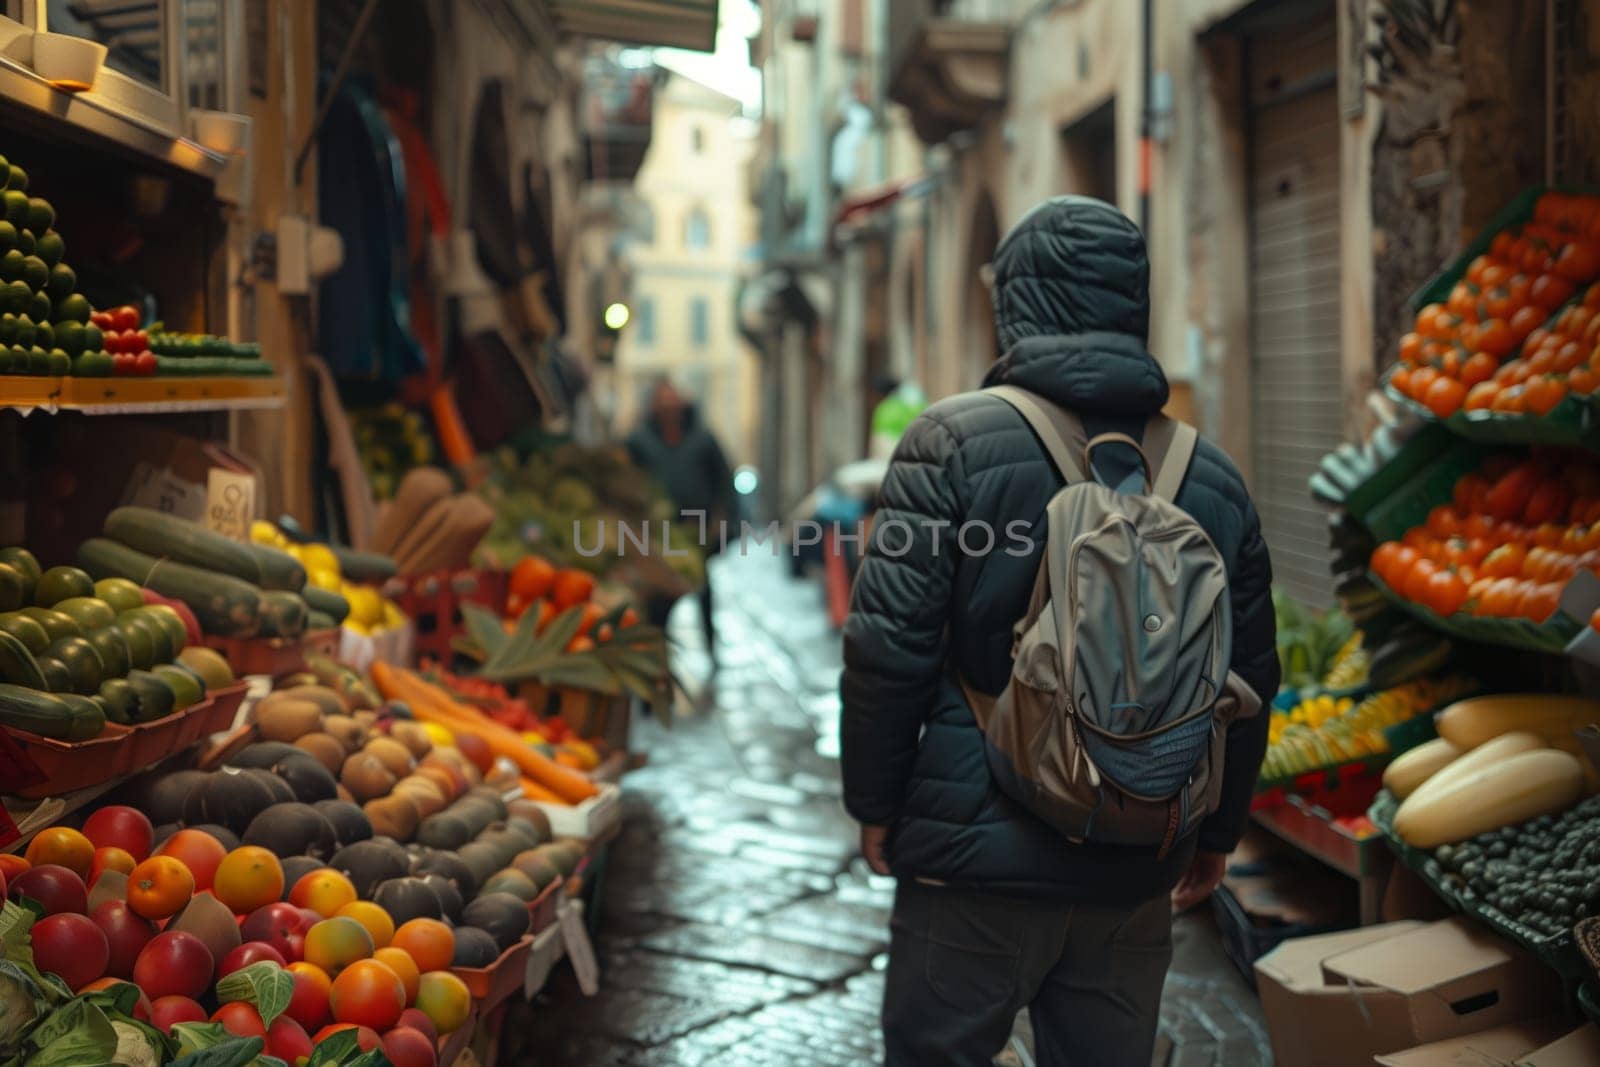 A man selling natural foods from his backpack is walking through a bustling city market, offering whole foods to eager customers as he travels from building to building engaging in trade